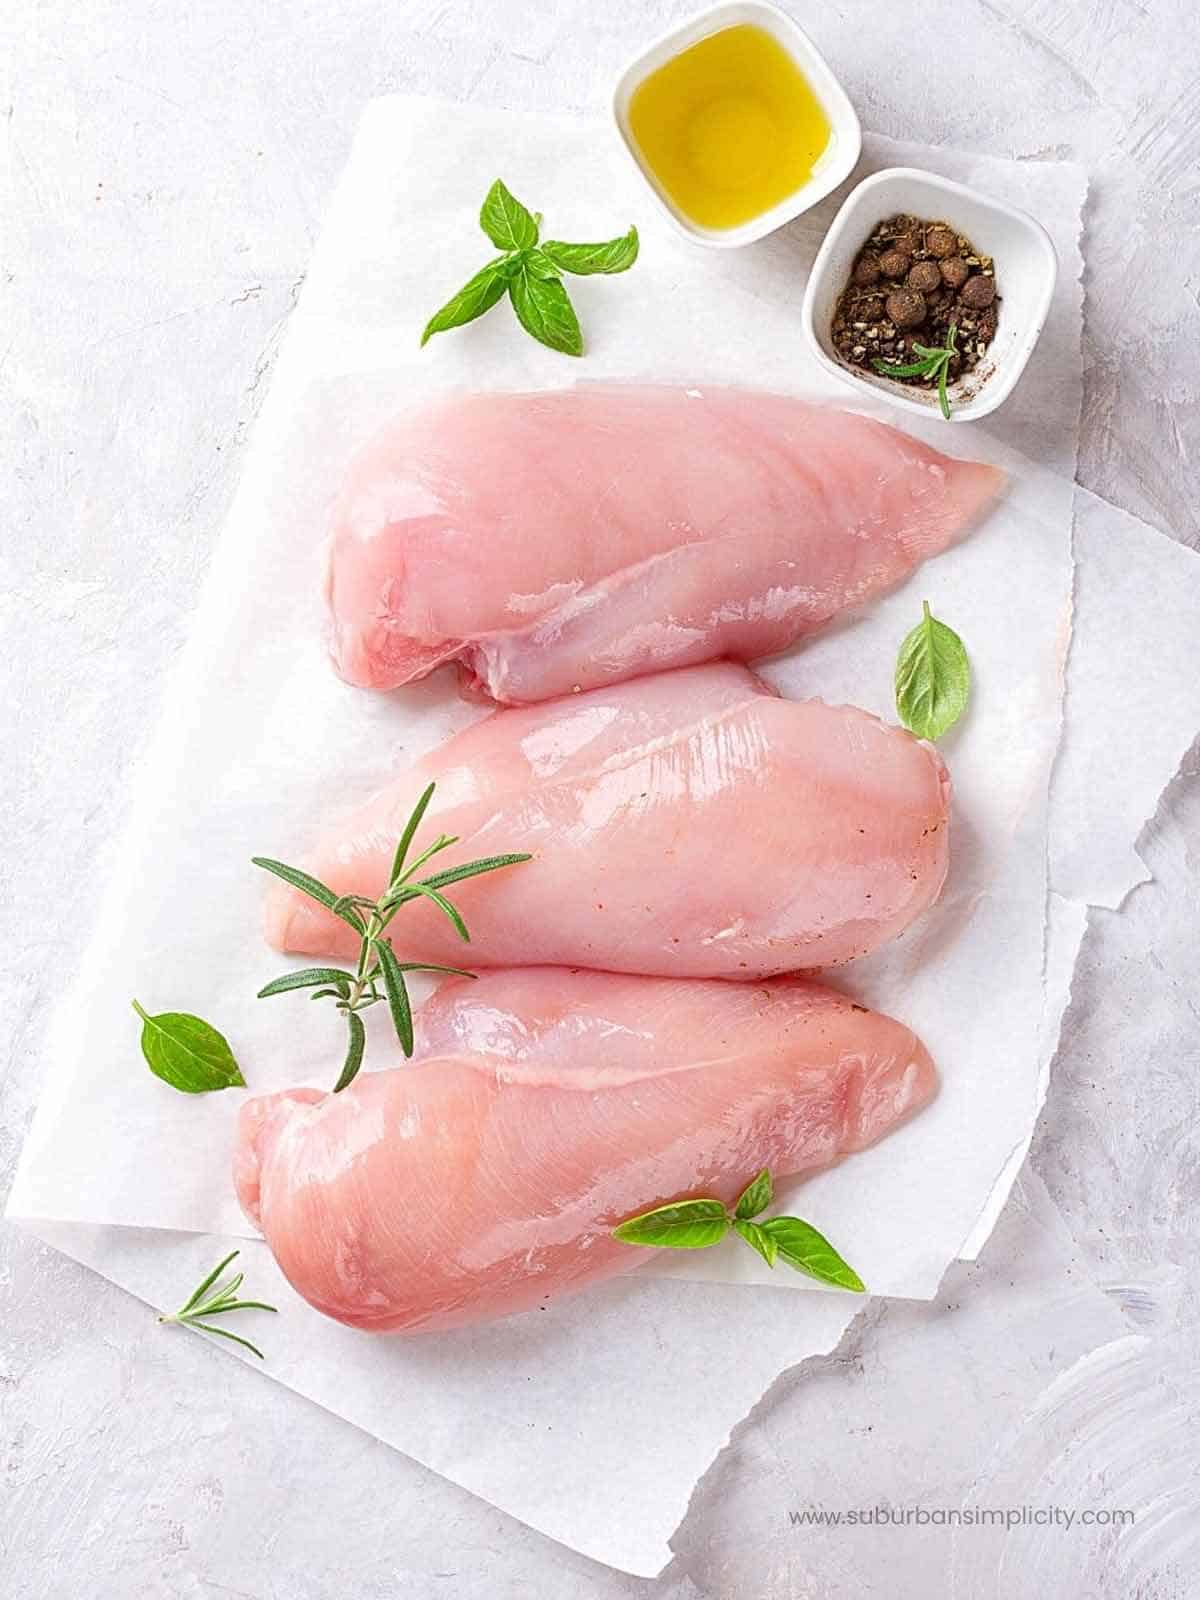 How to Defrost Chicken: The Ultimate Guide to Defrosting Chicken Properly